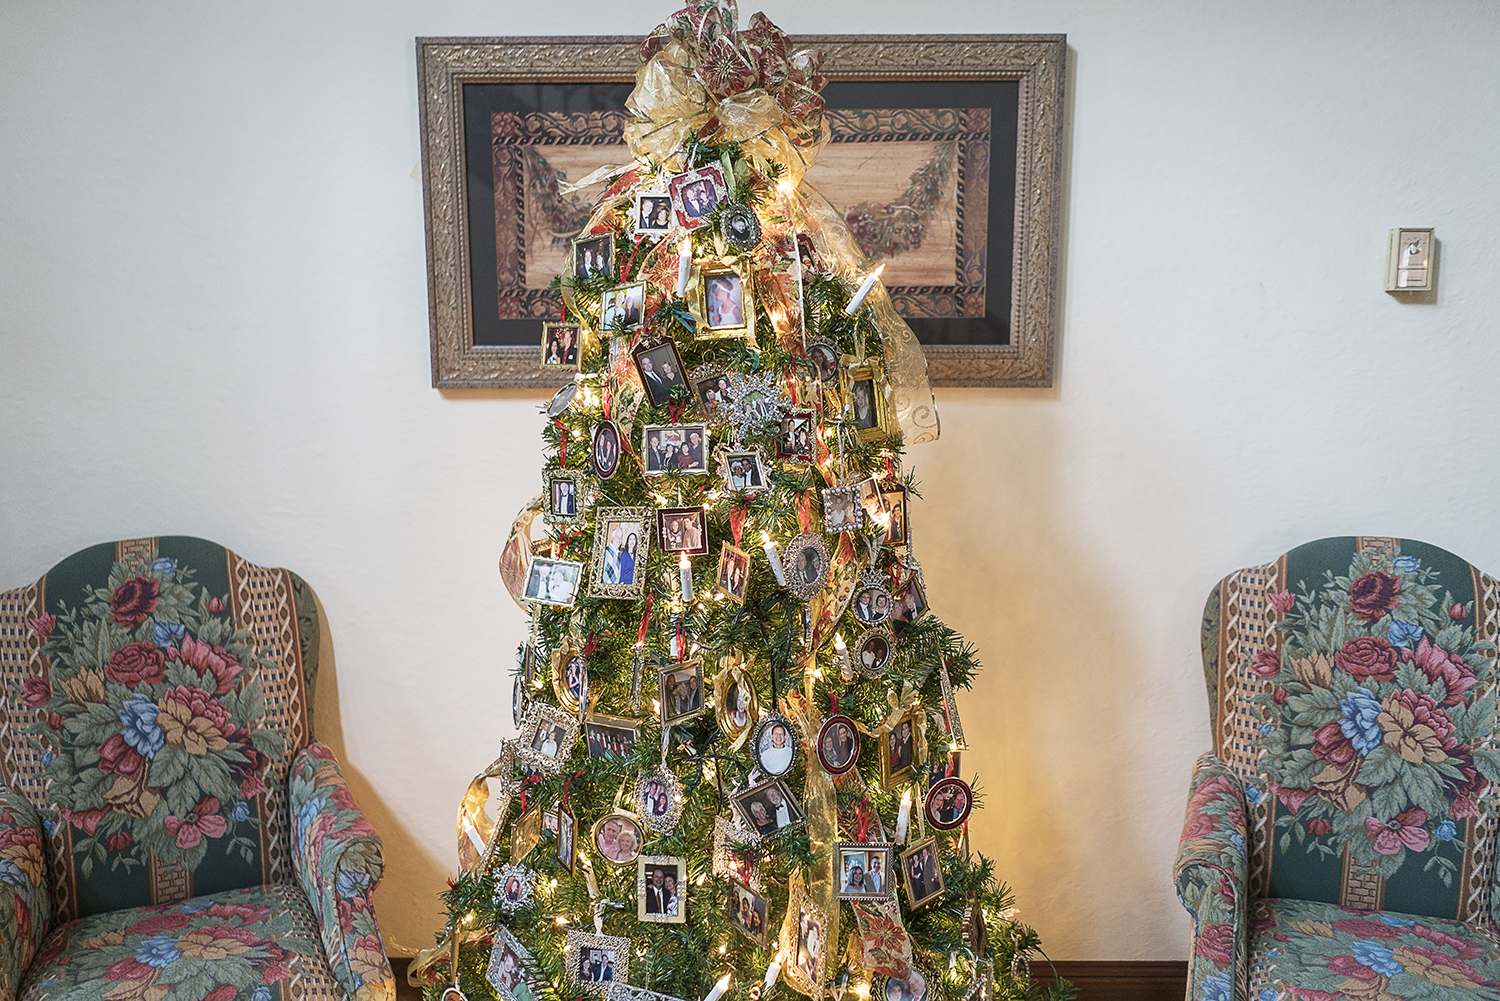 A Christmas tree adorned with portraits and ribbon stands in the foyer of the Heddy residence.